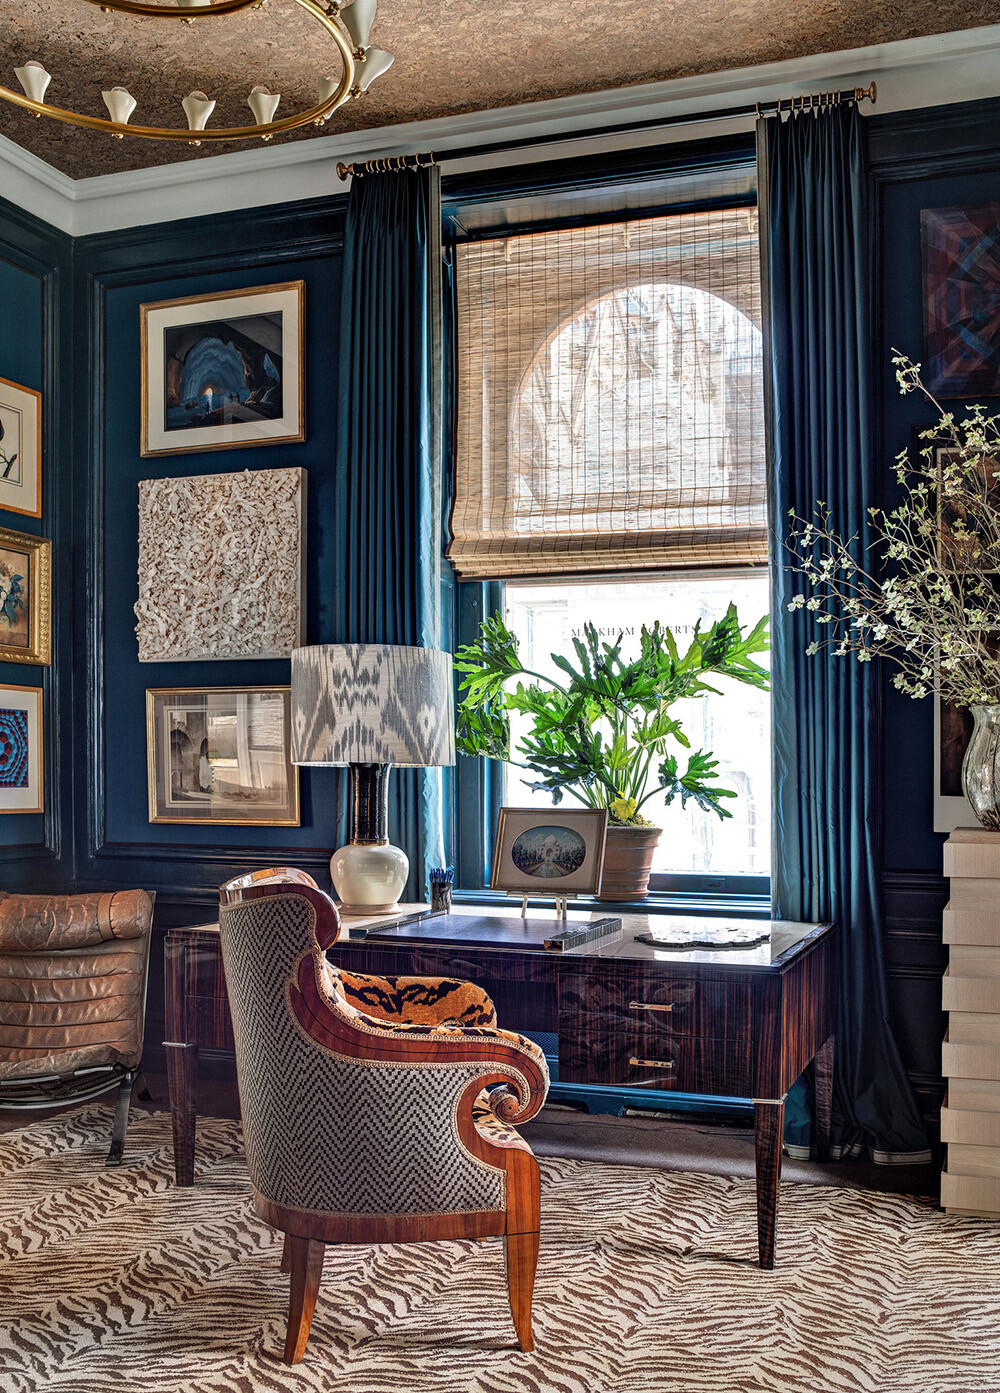 Painting Room With Hues Of Blue - www.homeworlddesign. com (9)